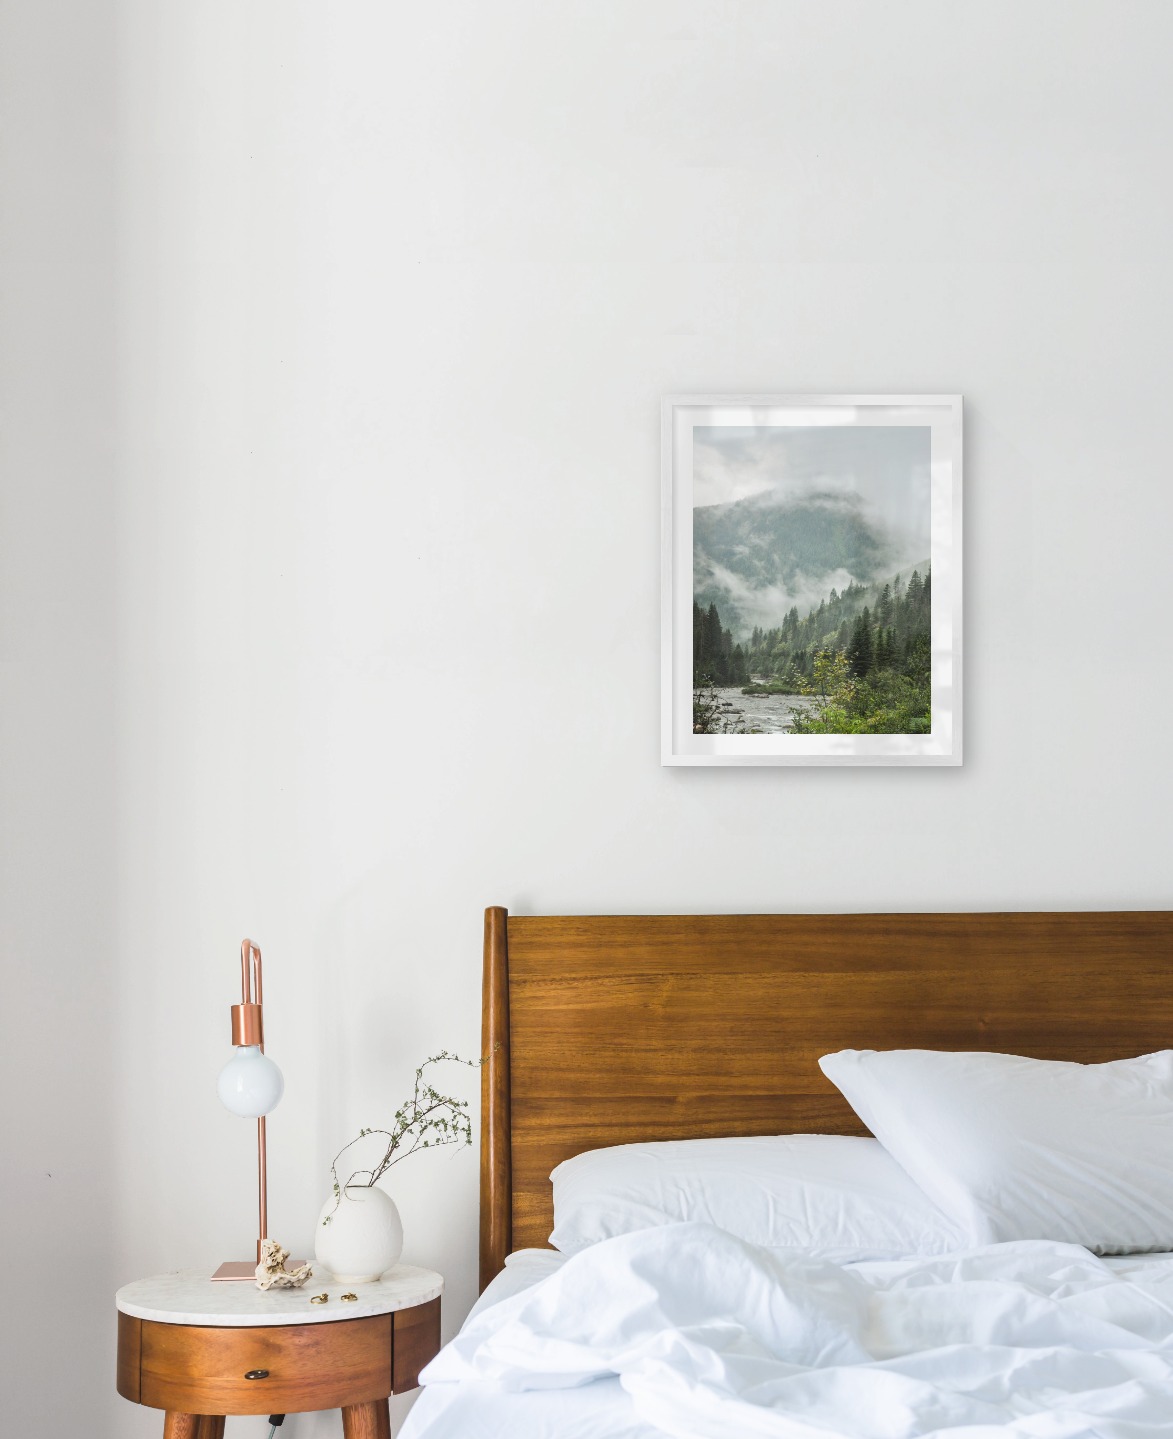 Gallery wall with picture frame in silver in size 40x50 with print "River in front of mountains"